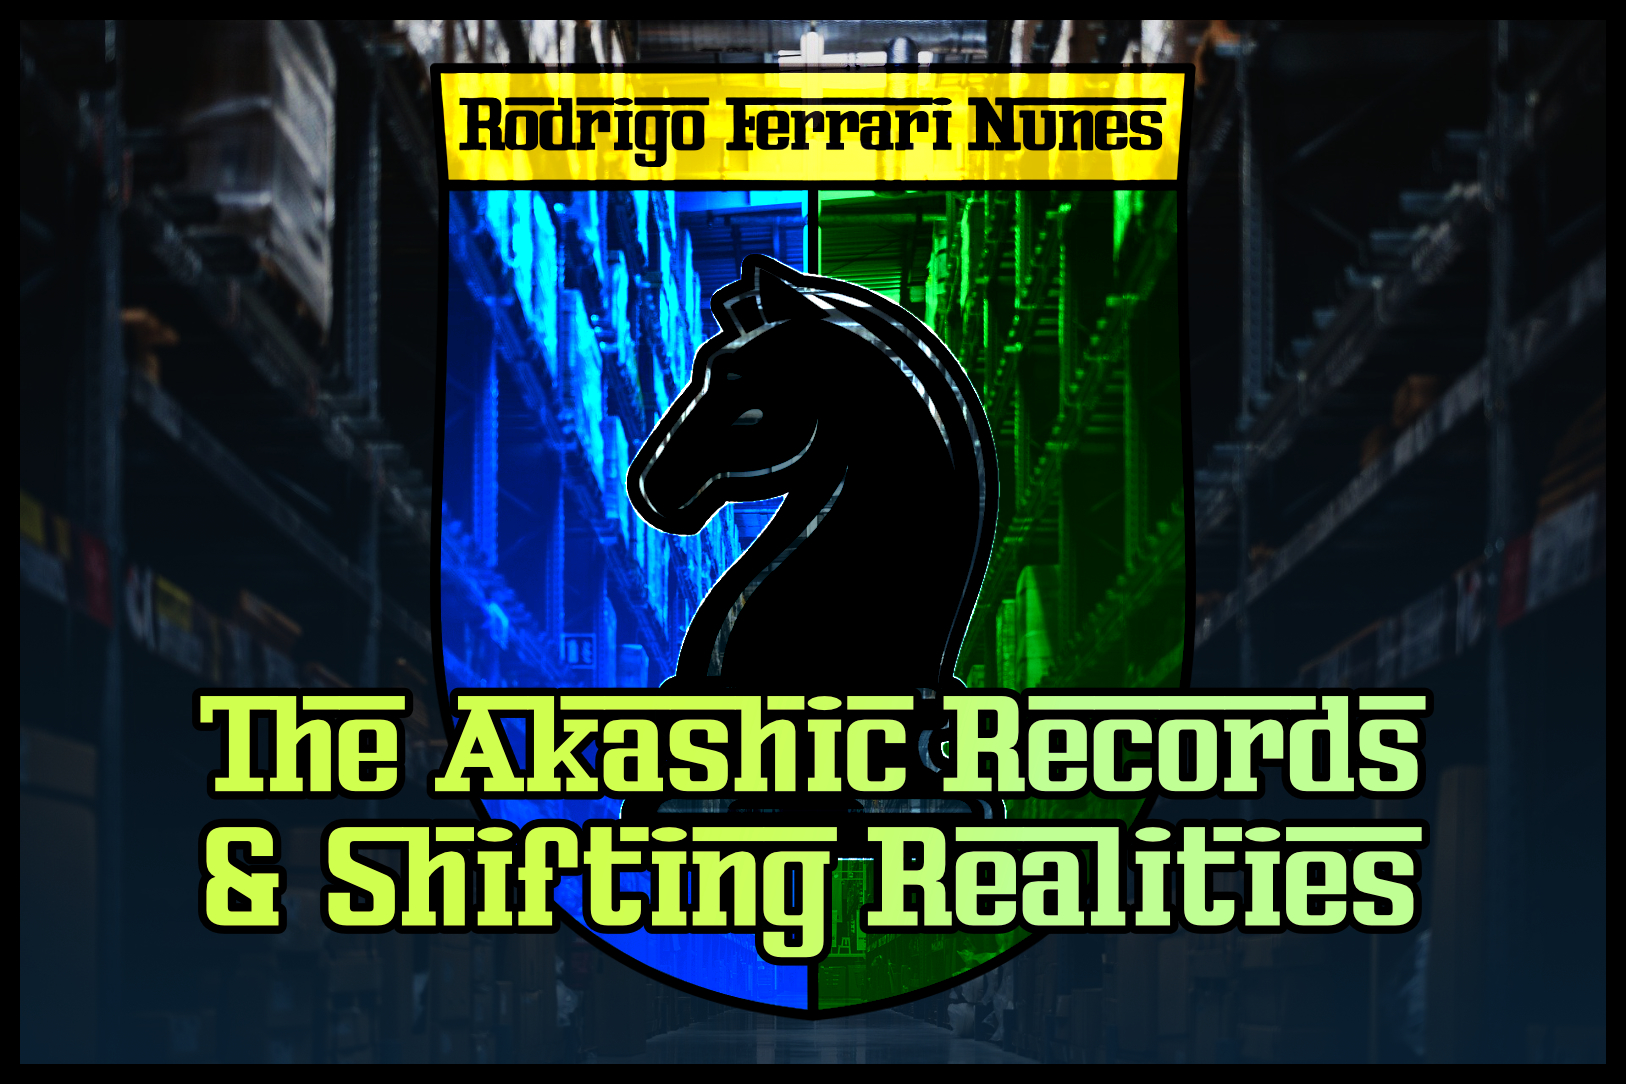 THE AKASHIC RECORDS AND SHIFTING REALITIES